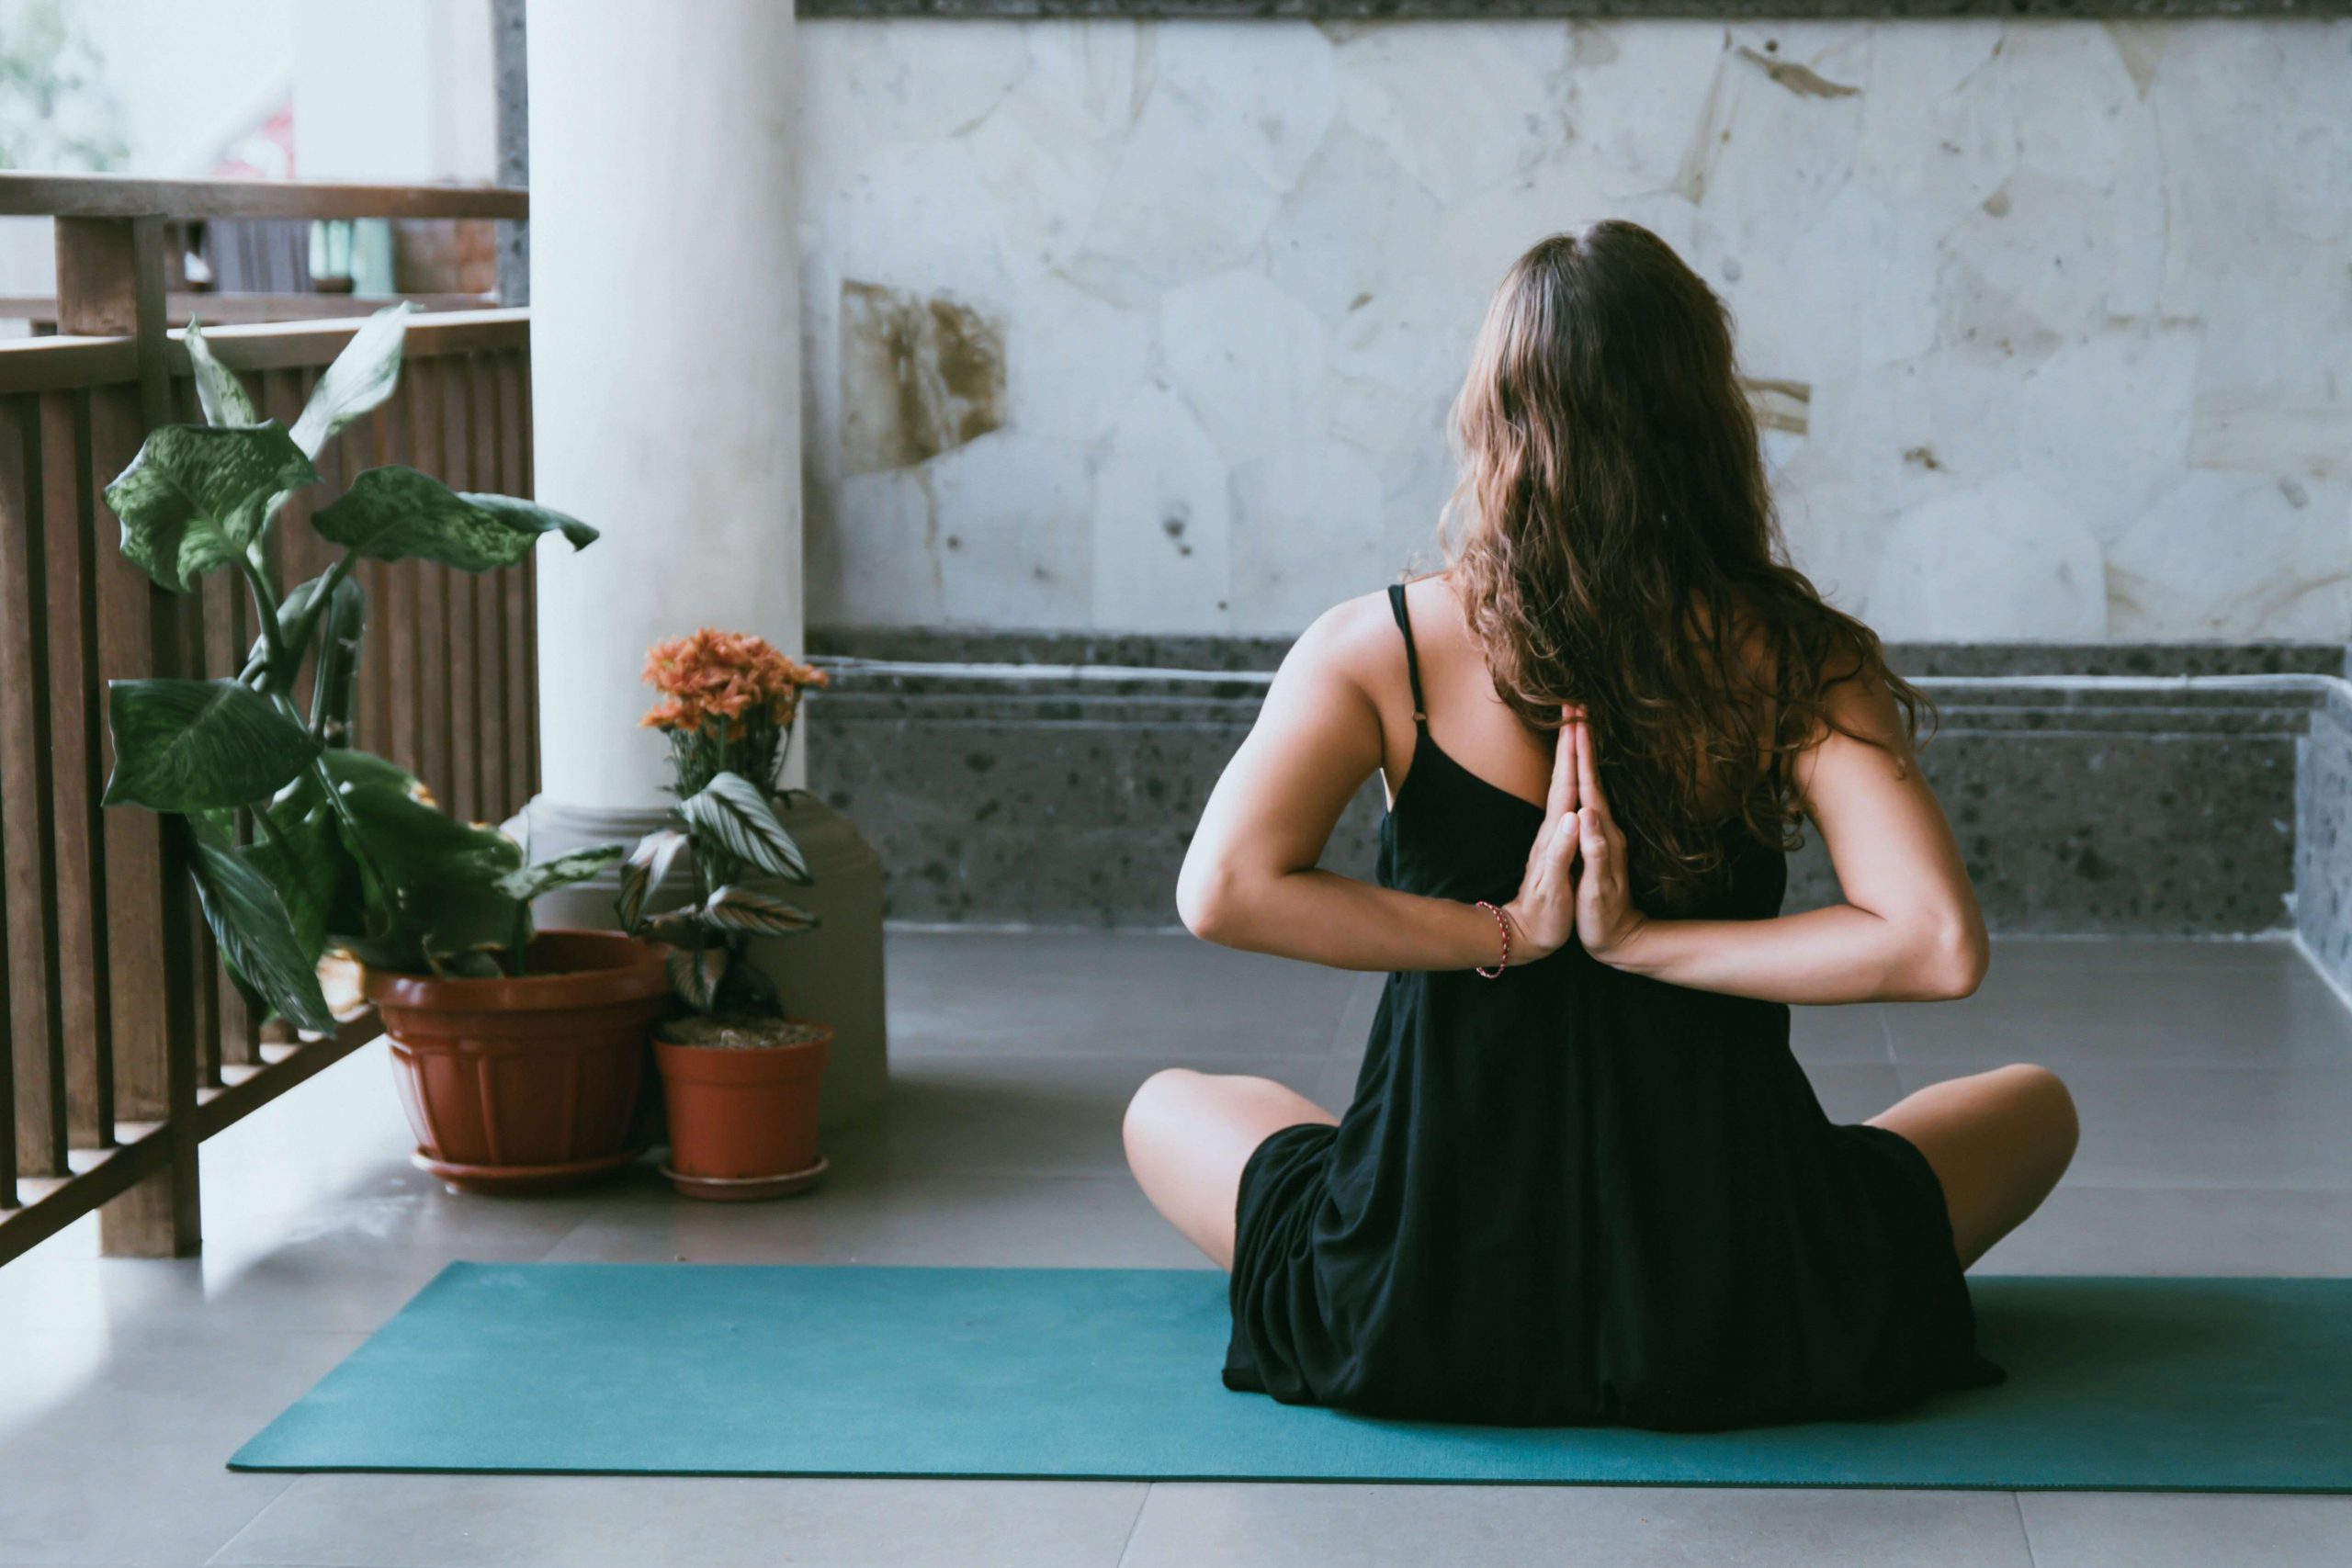 Can Meditation Help Your Relationship?